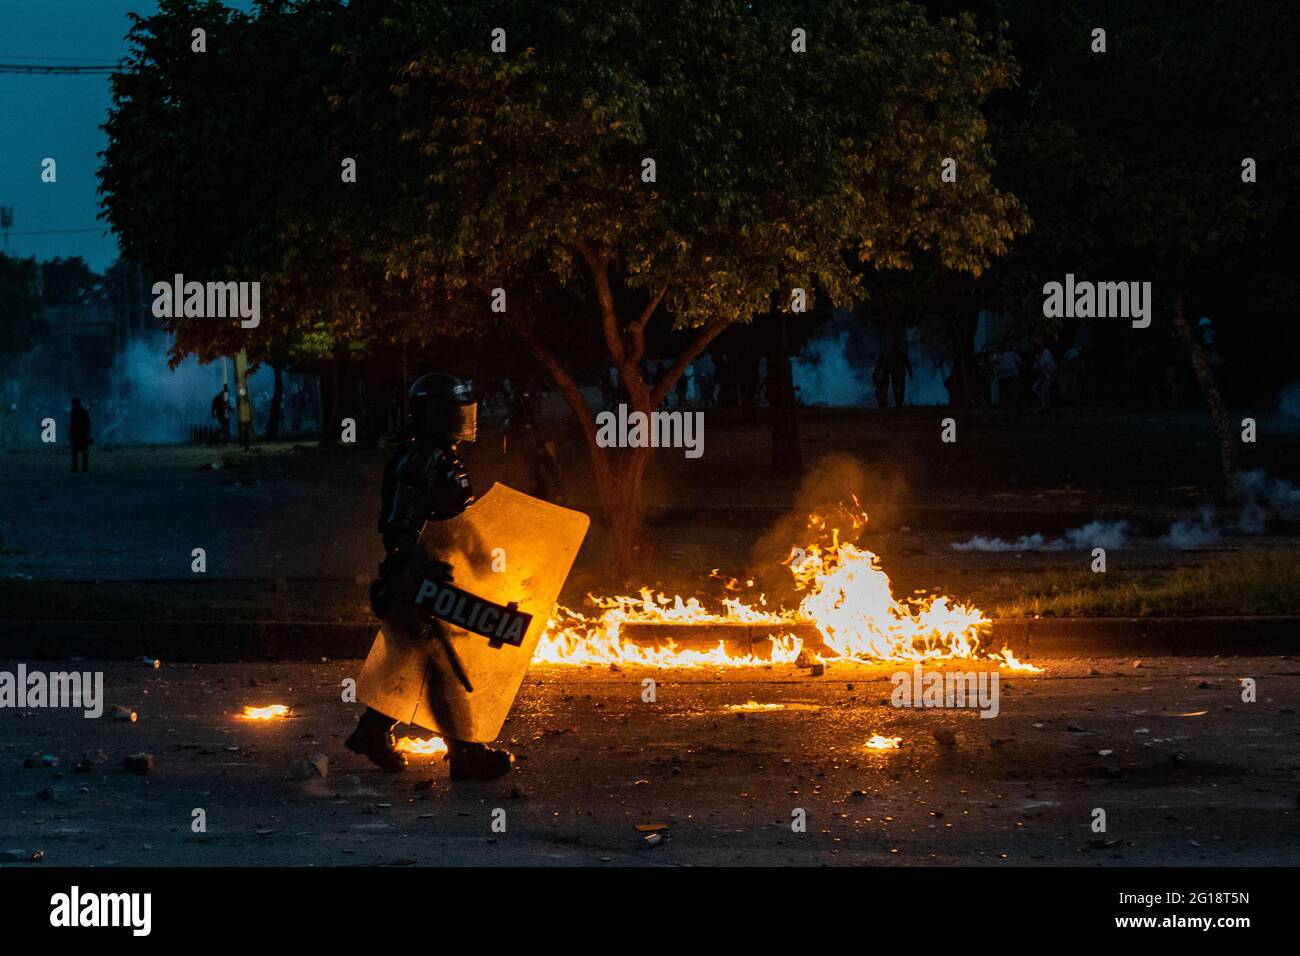 A Colombian riot police officer (ESMAD) walks past a fire as clashes between demonstrators and Colombia's riot police (ESMAD) erupt in Medellín, Colombia after several weeks of anti-government protest against President Ivan Duque's tax and health reforms and unrest and abuse of authority cases that leave at least 70 dead according to NGOs on June 4, 2021. Stock Photo